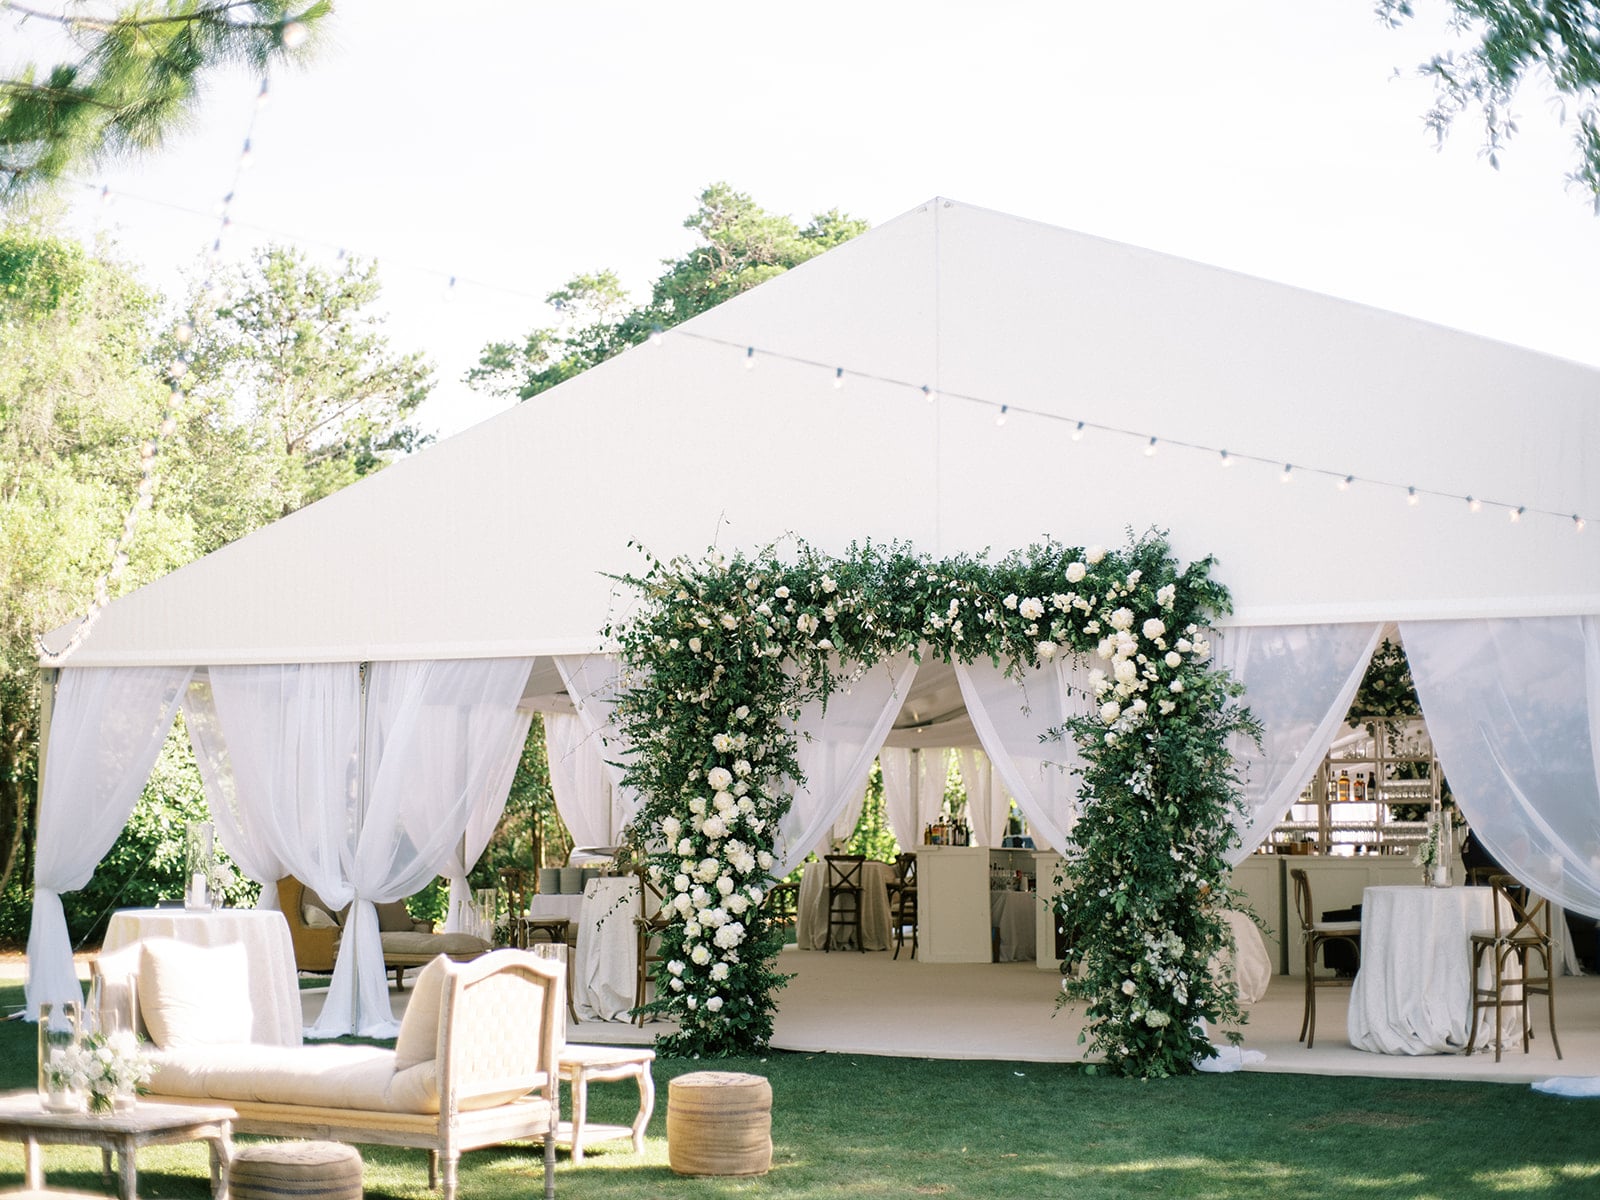 Floral and green tent entrance